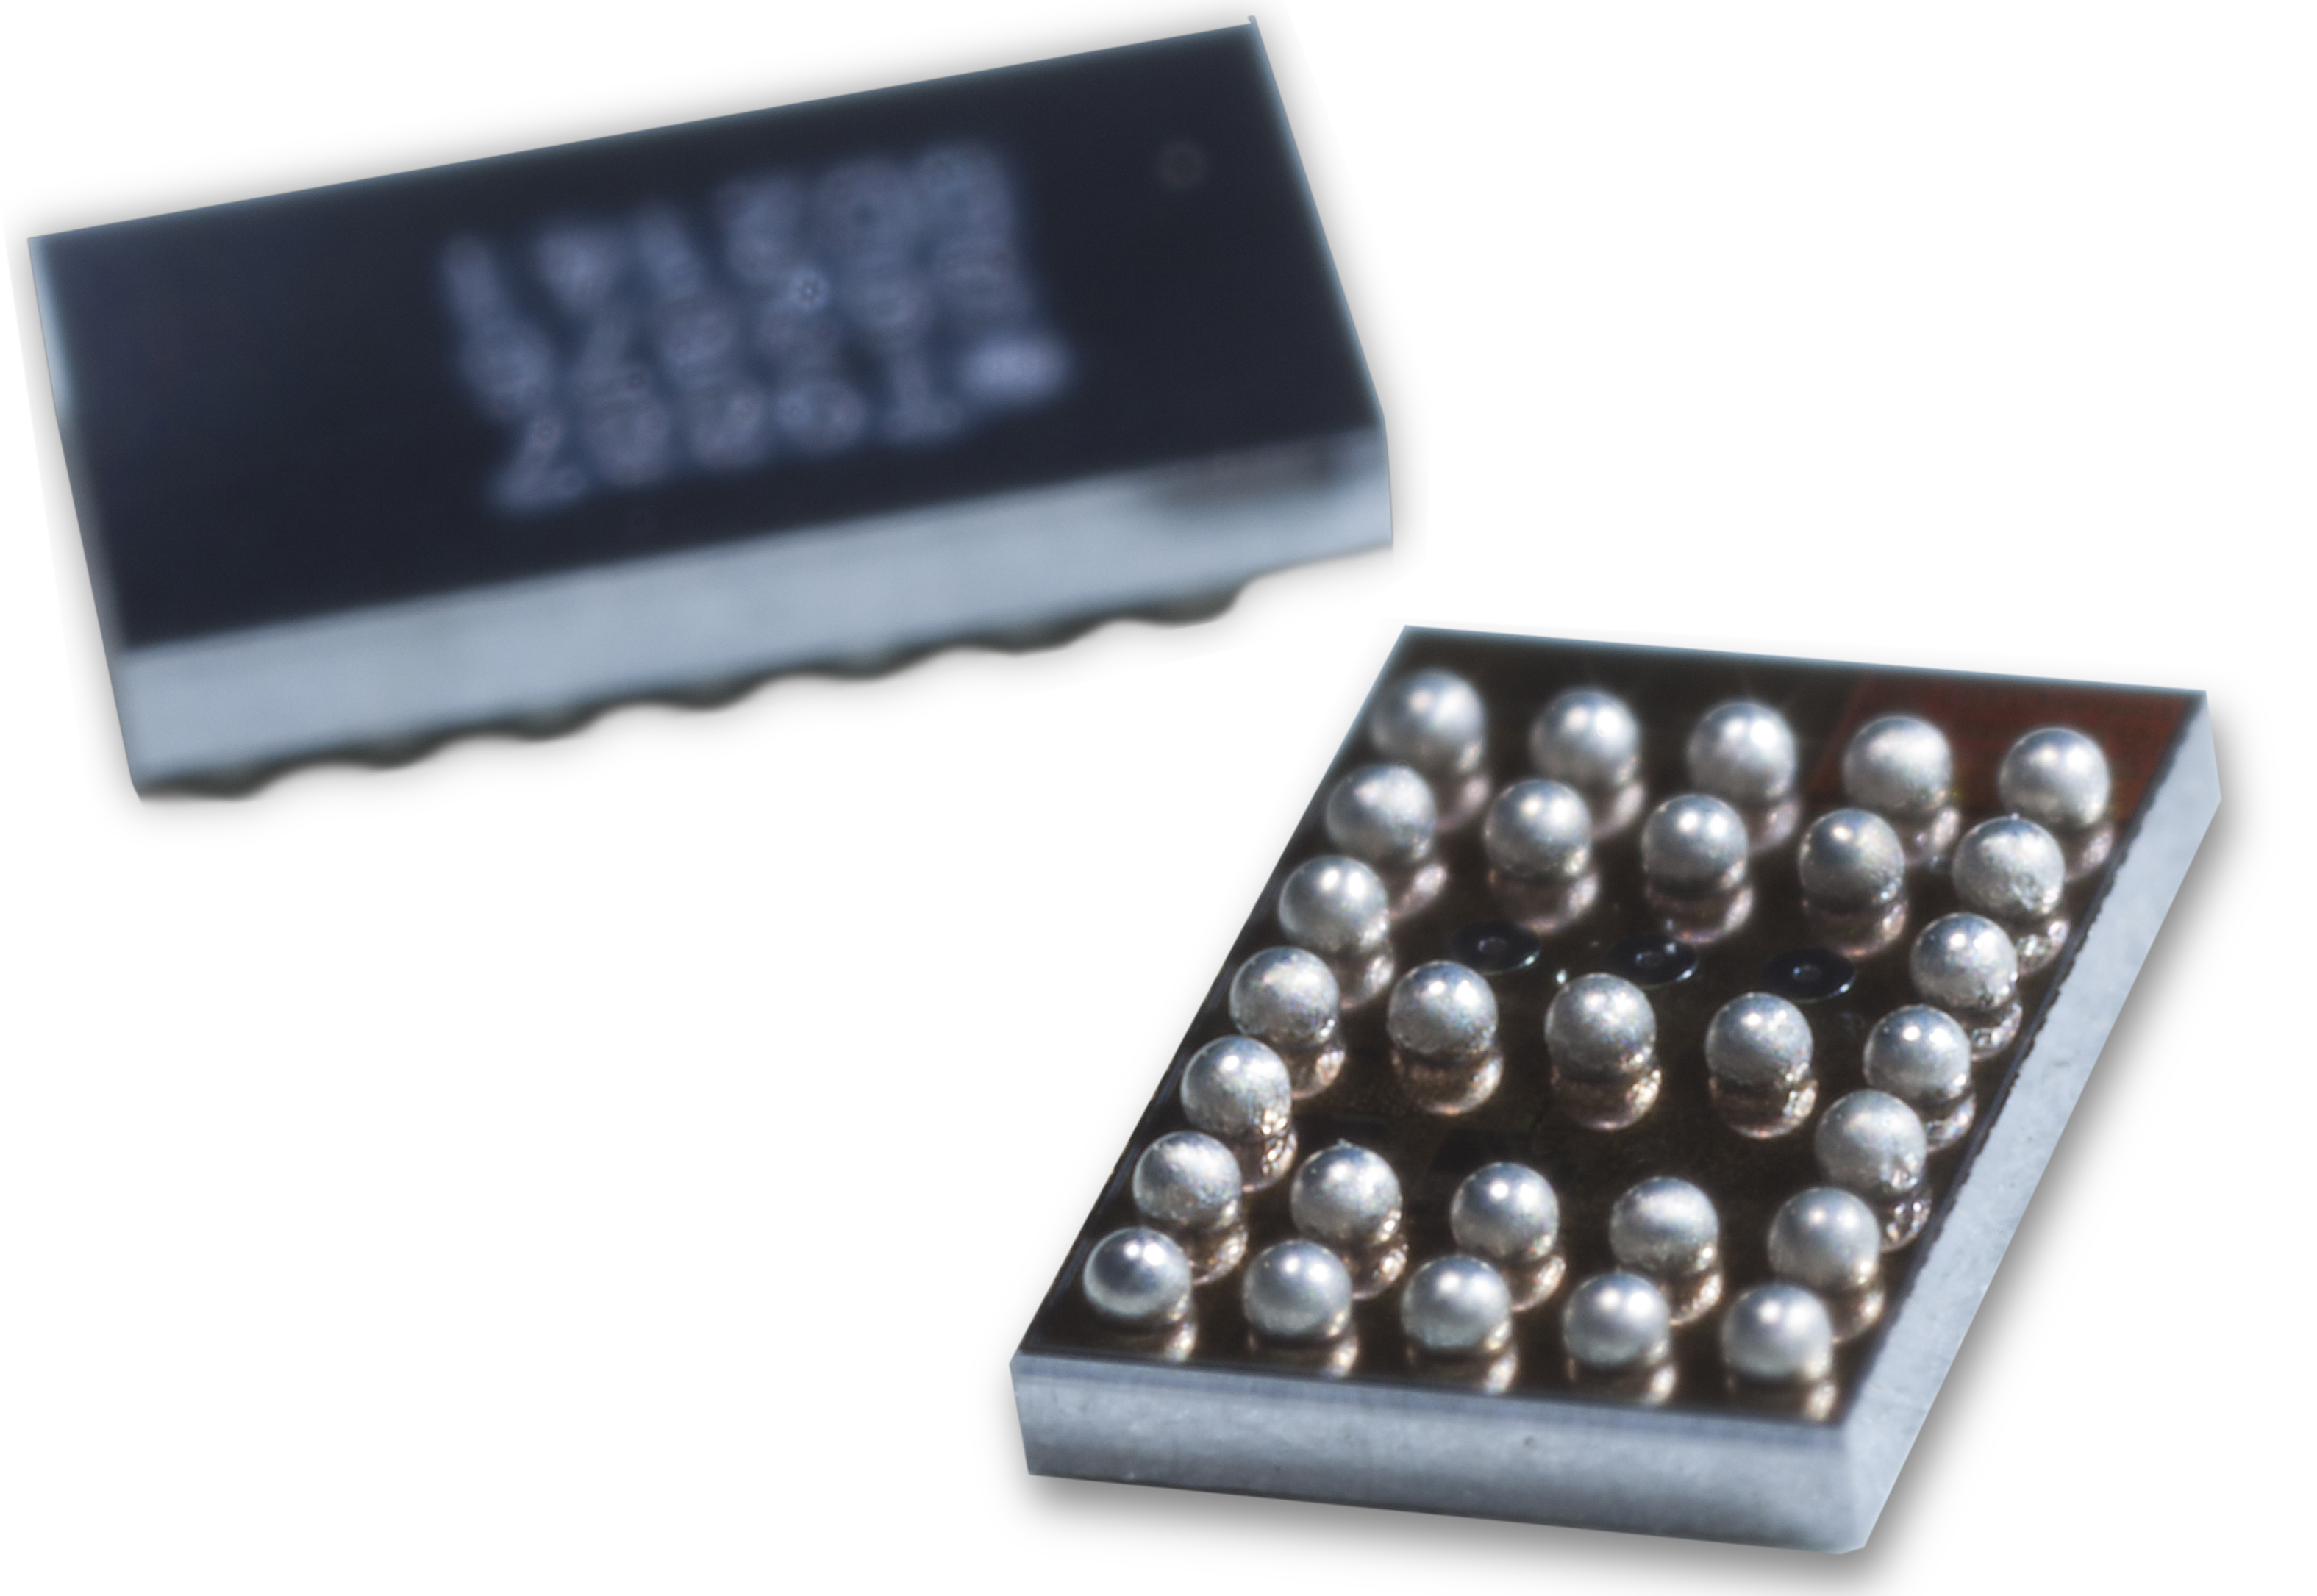 Class D amplifier for mobile applications delivers over 5 times the power to micro speakers